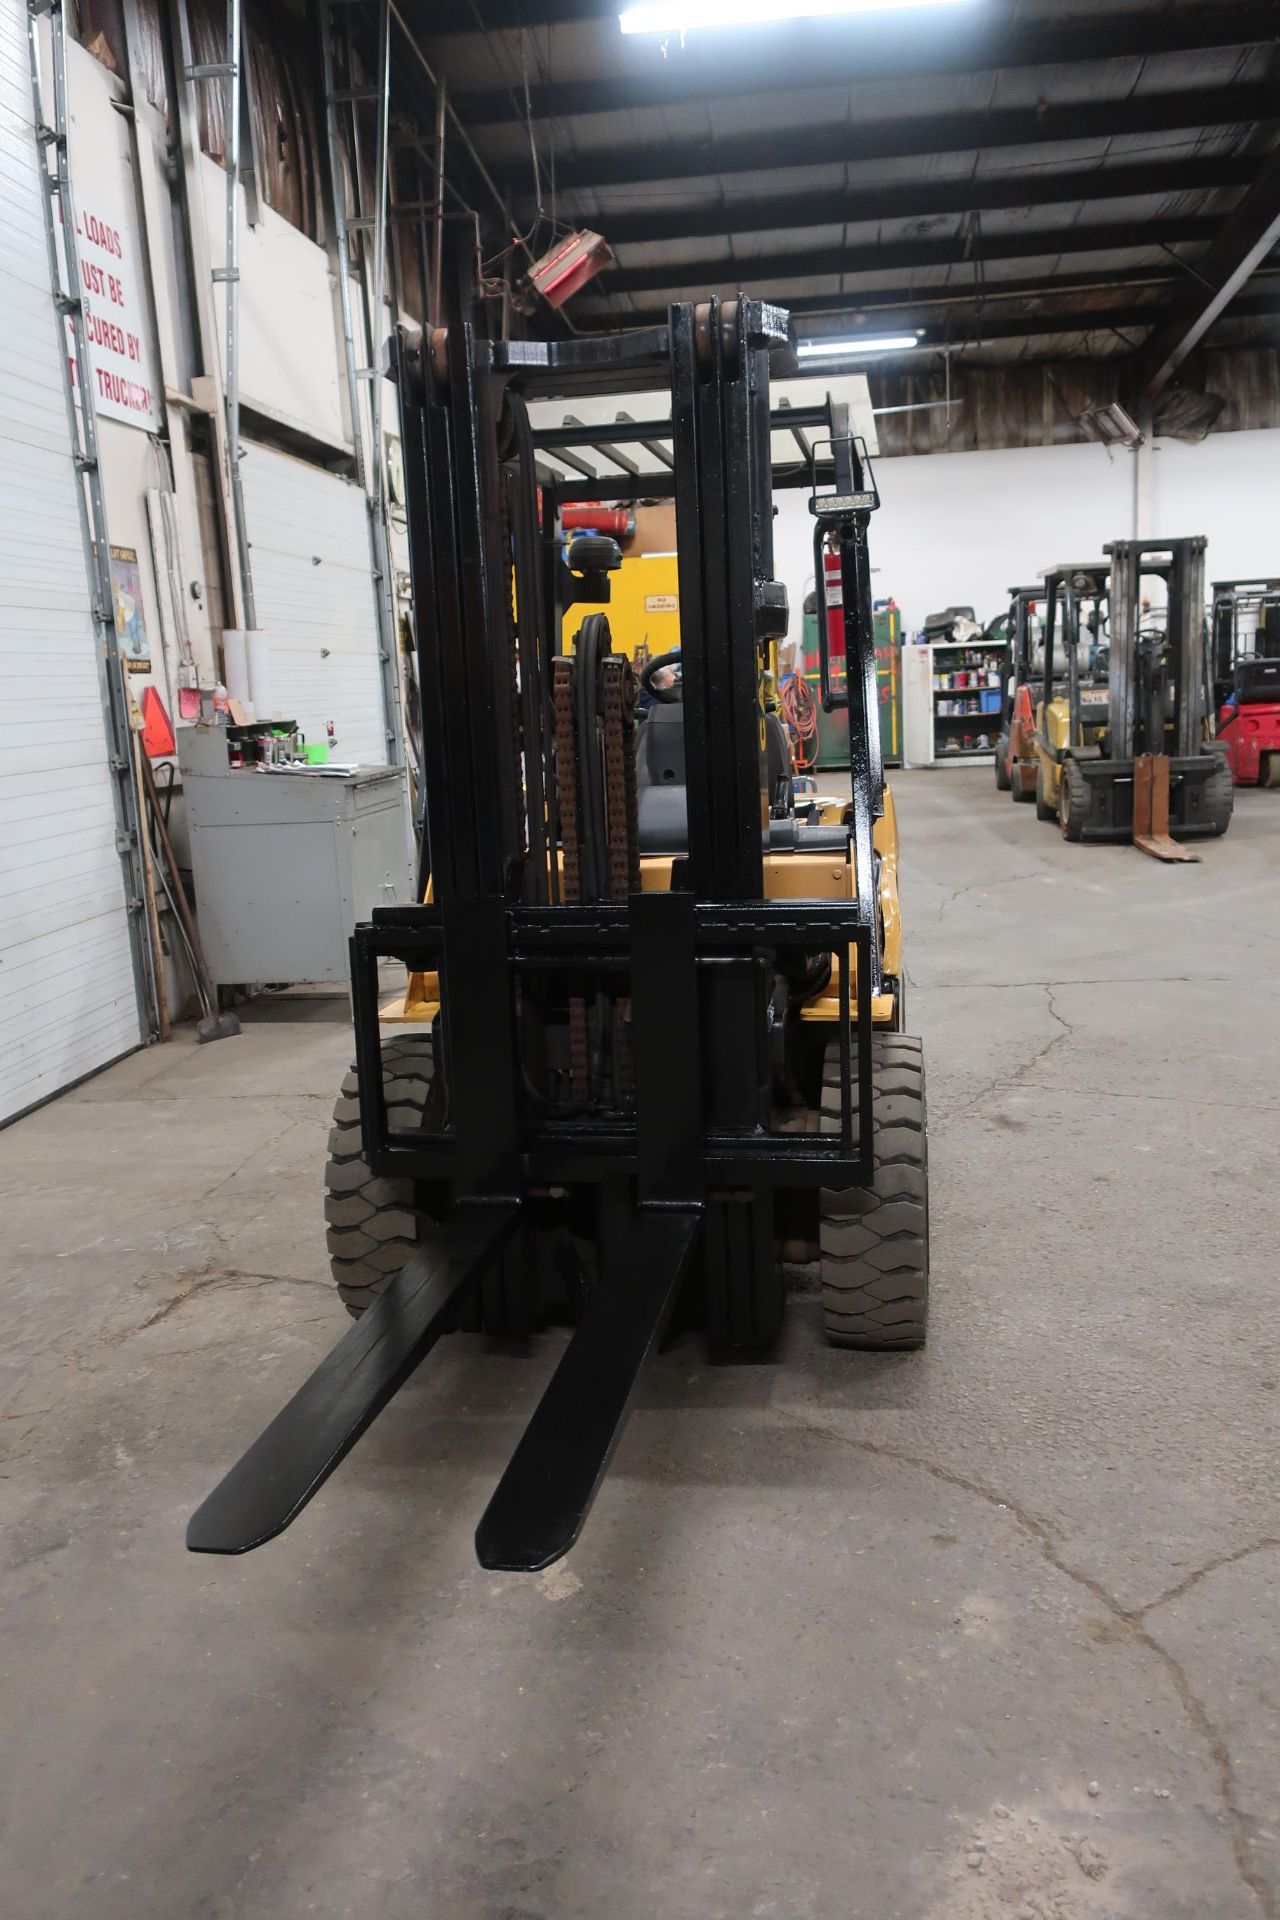 FREE CUSTOMS - CAT OUTDOOR Forklift 5400lbs Capacity with 3-stage mast and sideshift Diesel - Image 2 of 2